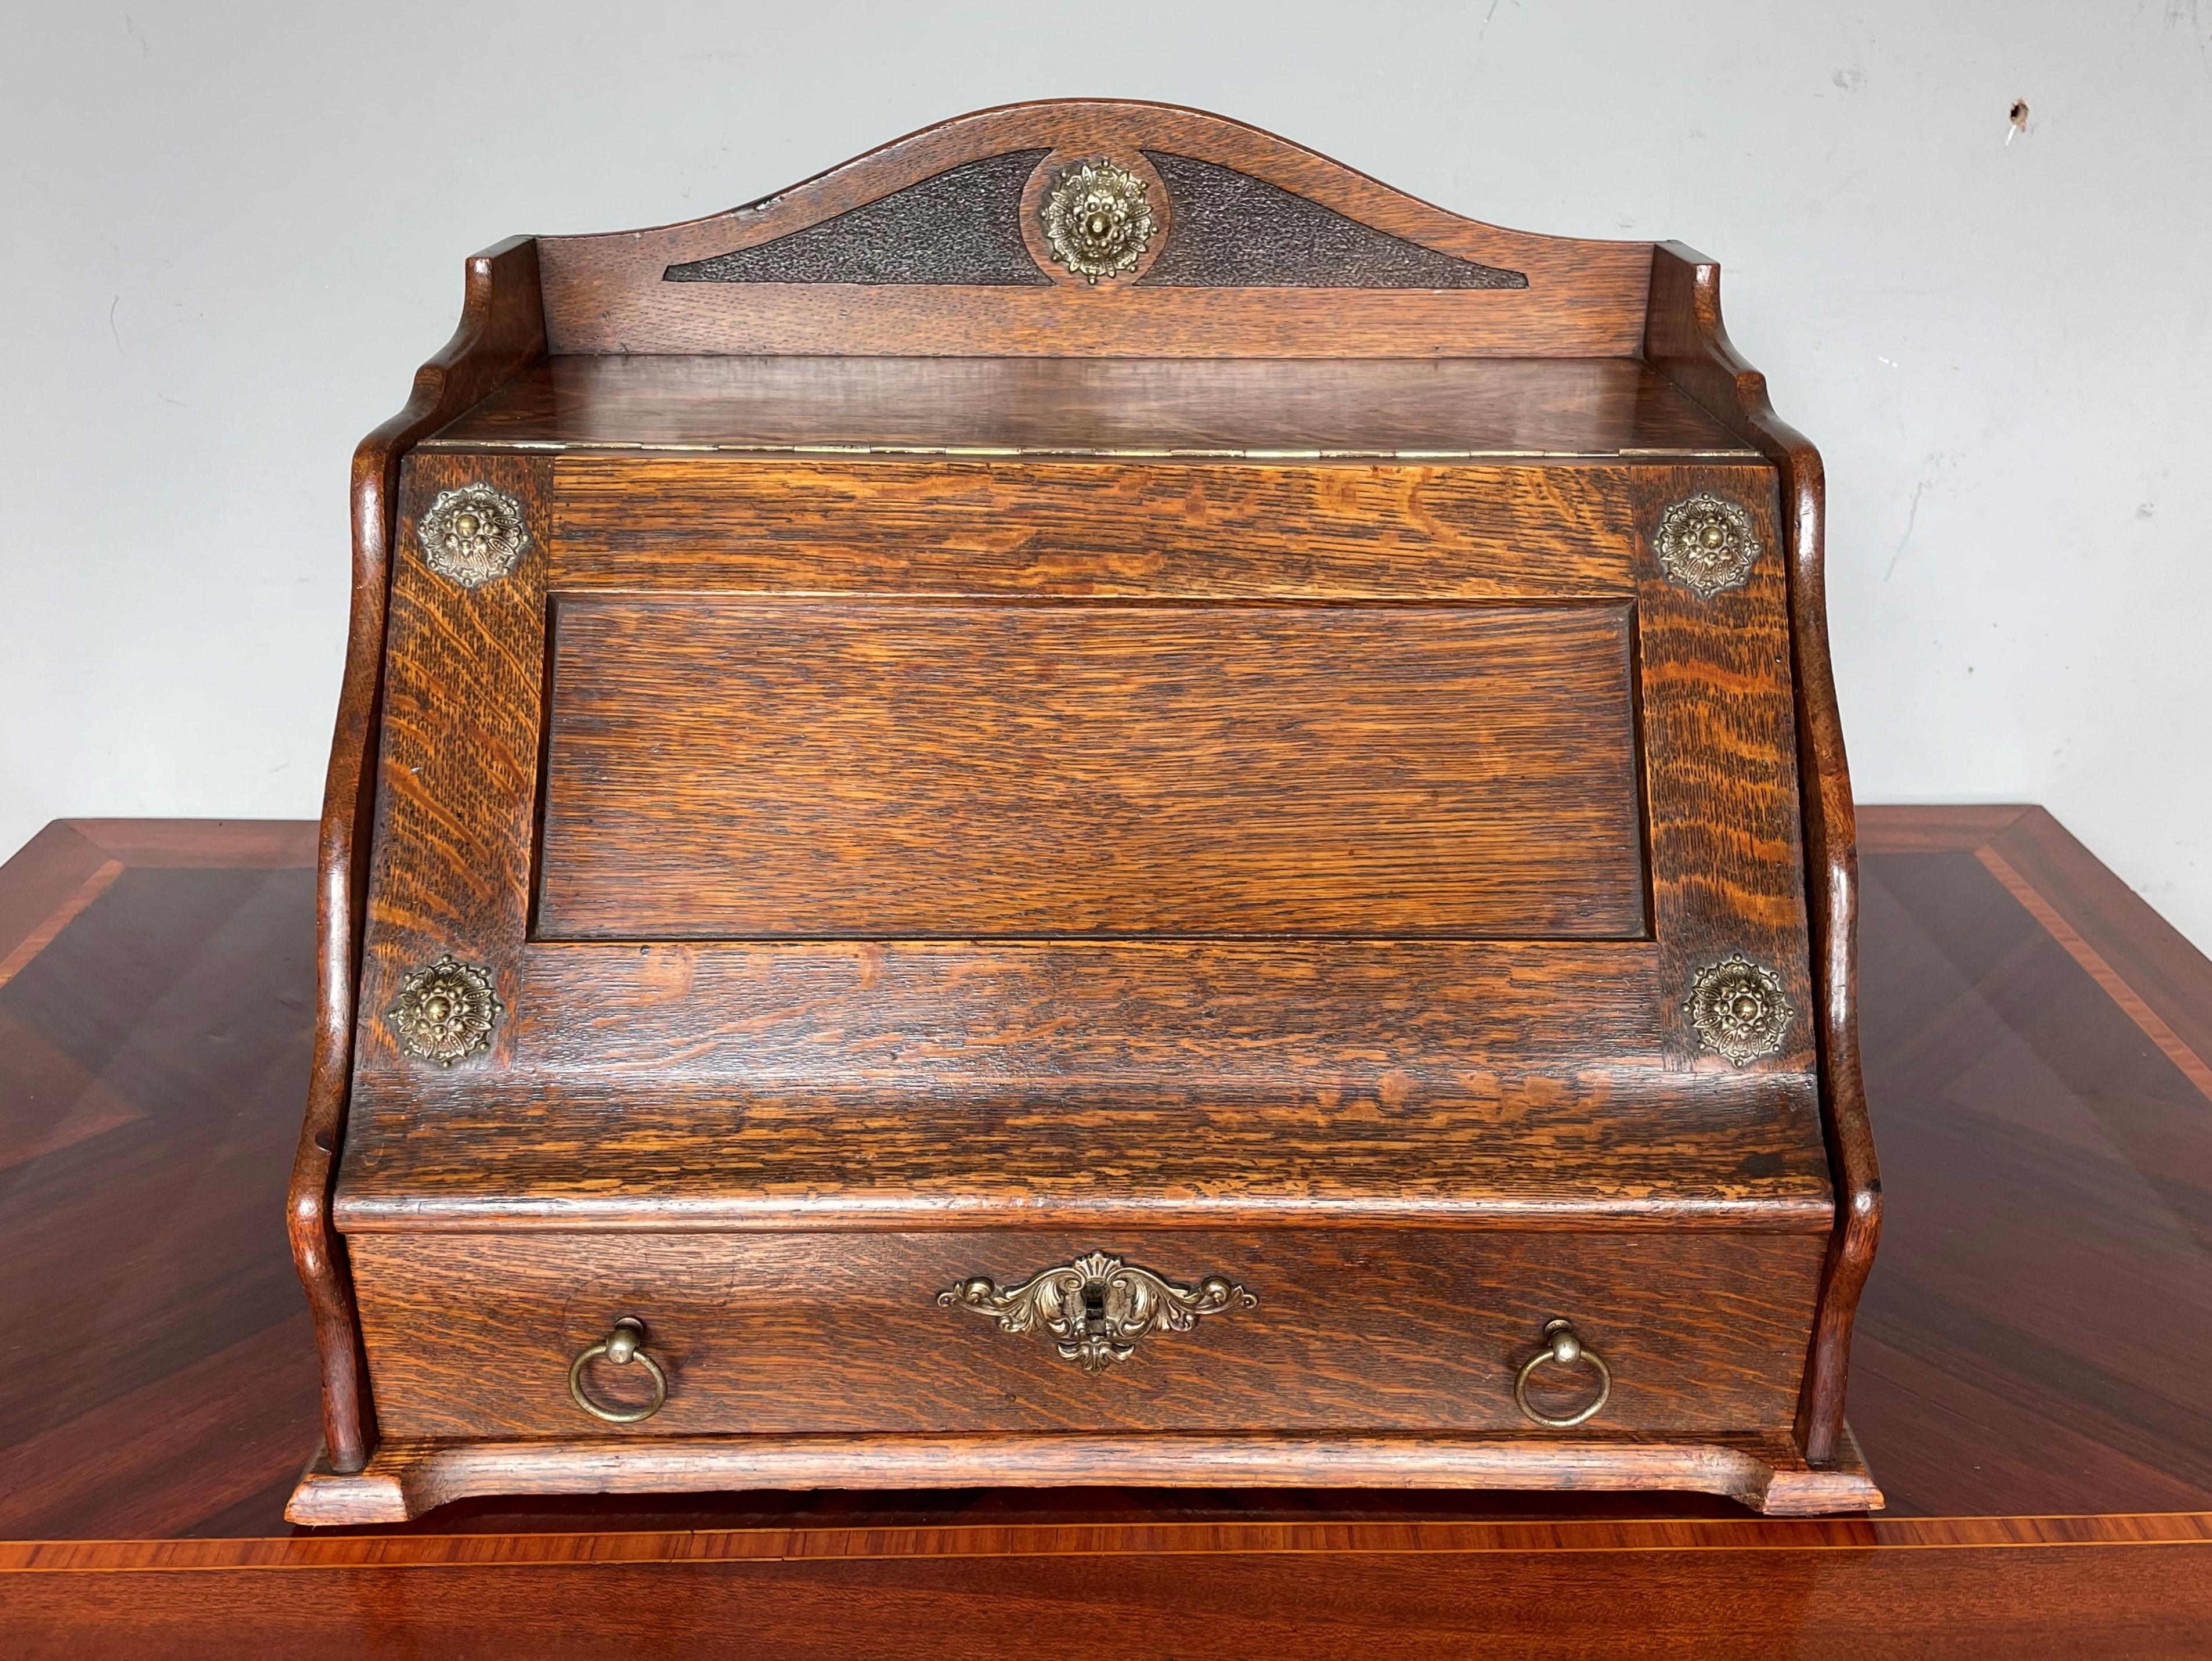 Hand-Carved Museum Quality Arts and Crafts Stationary Box w. Letter Racks & Drawer ca. 1900